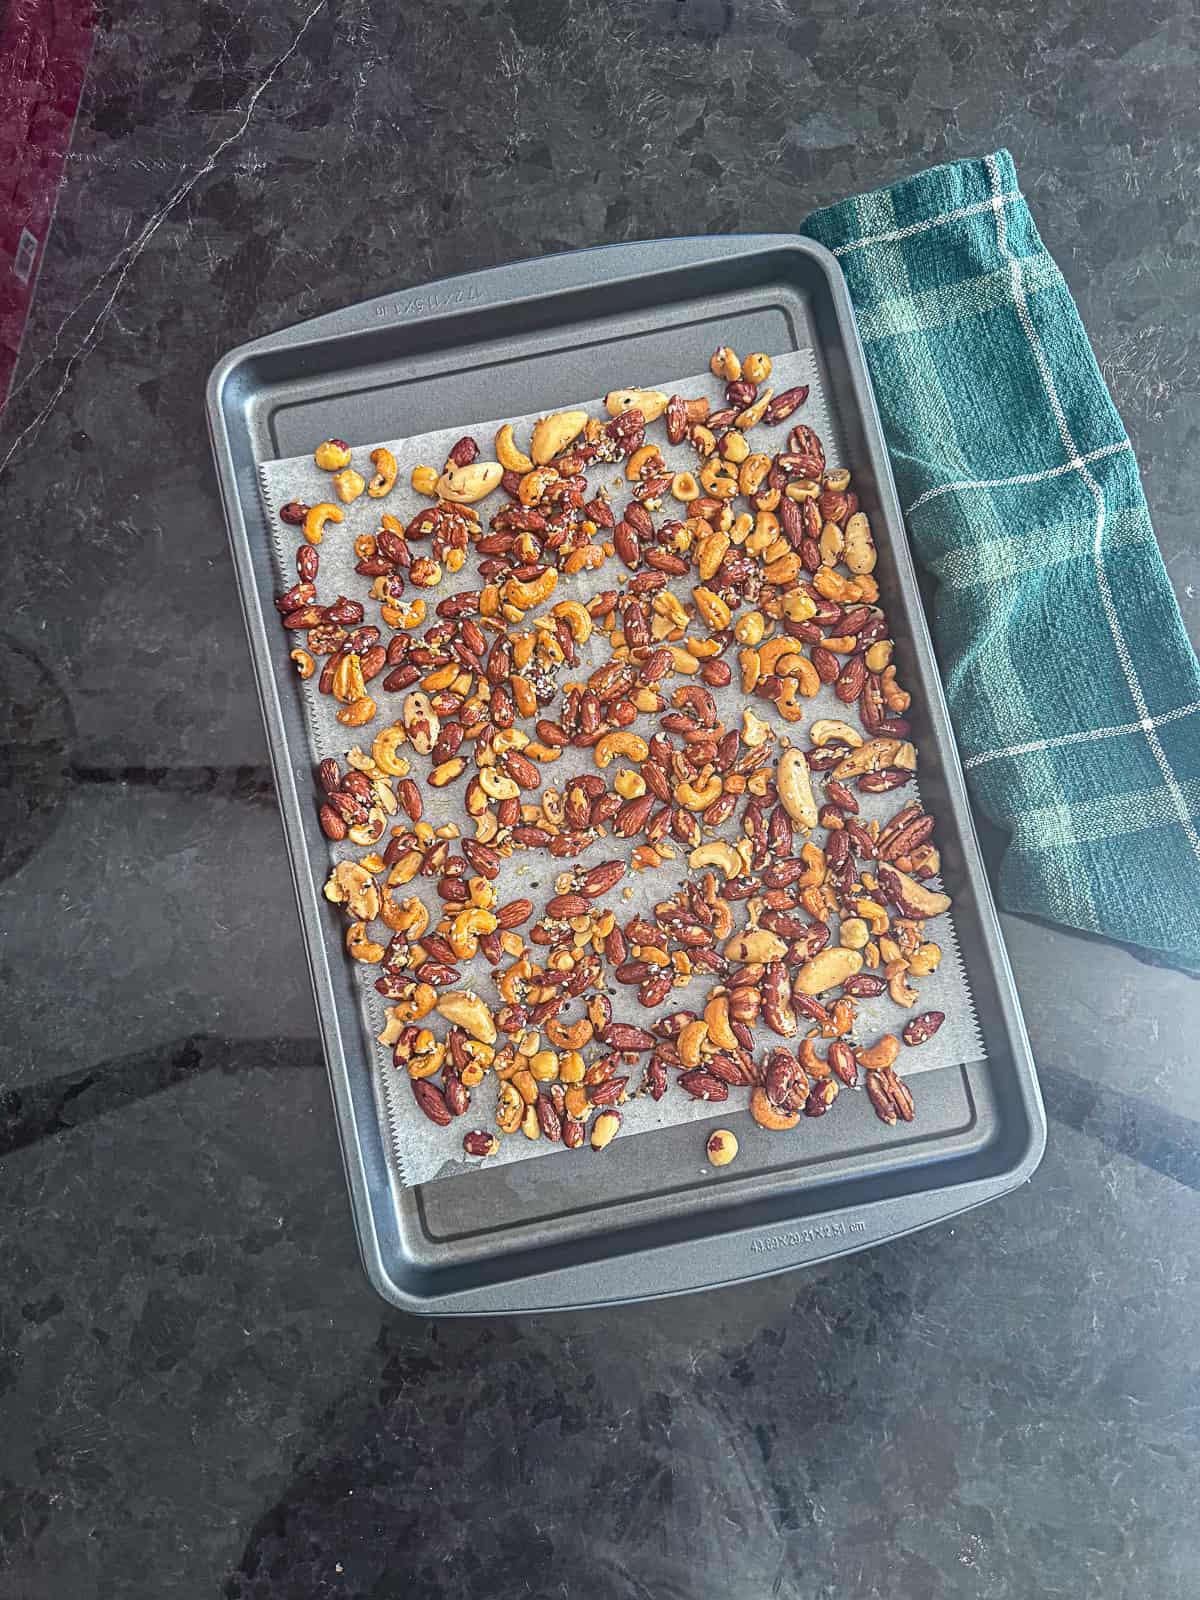 Rimmed Baking Sheet Tray with Everything Spiced Nuts 